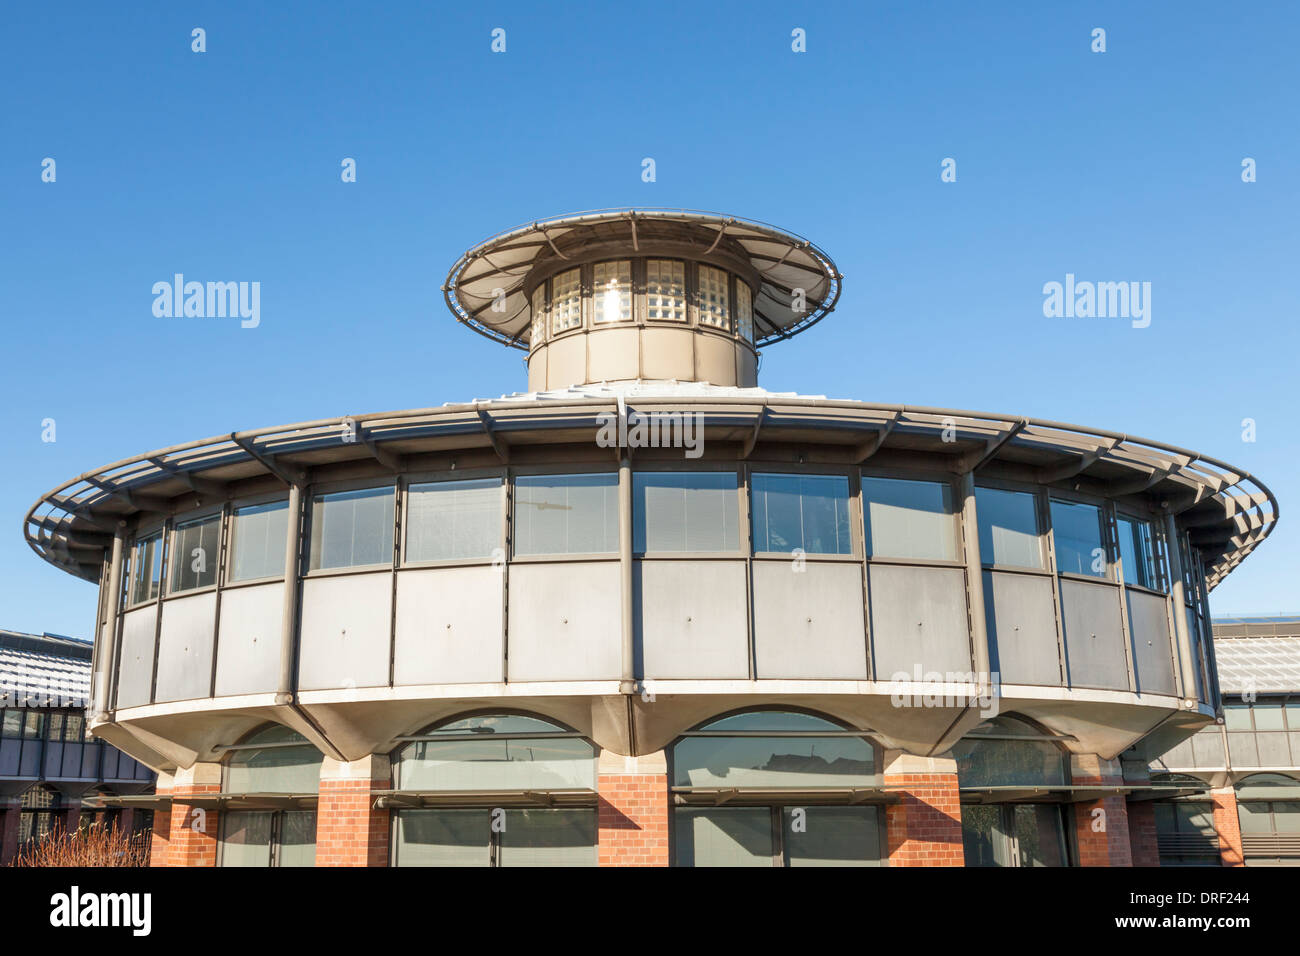 Modern 1990s architecture. Detail of one of the projecting attic roofs on the HMRC offices building in Nottingham, England, UK Stock Photo